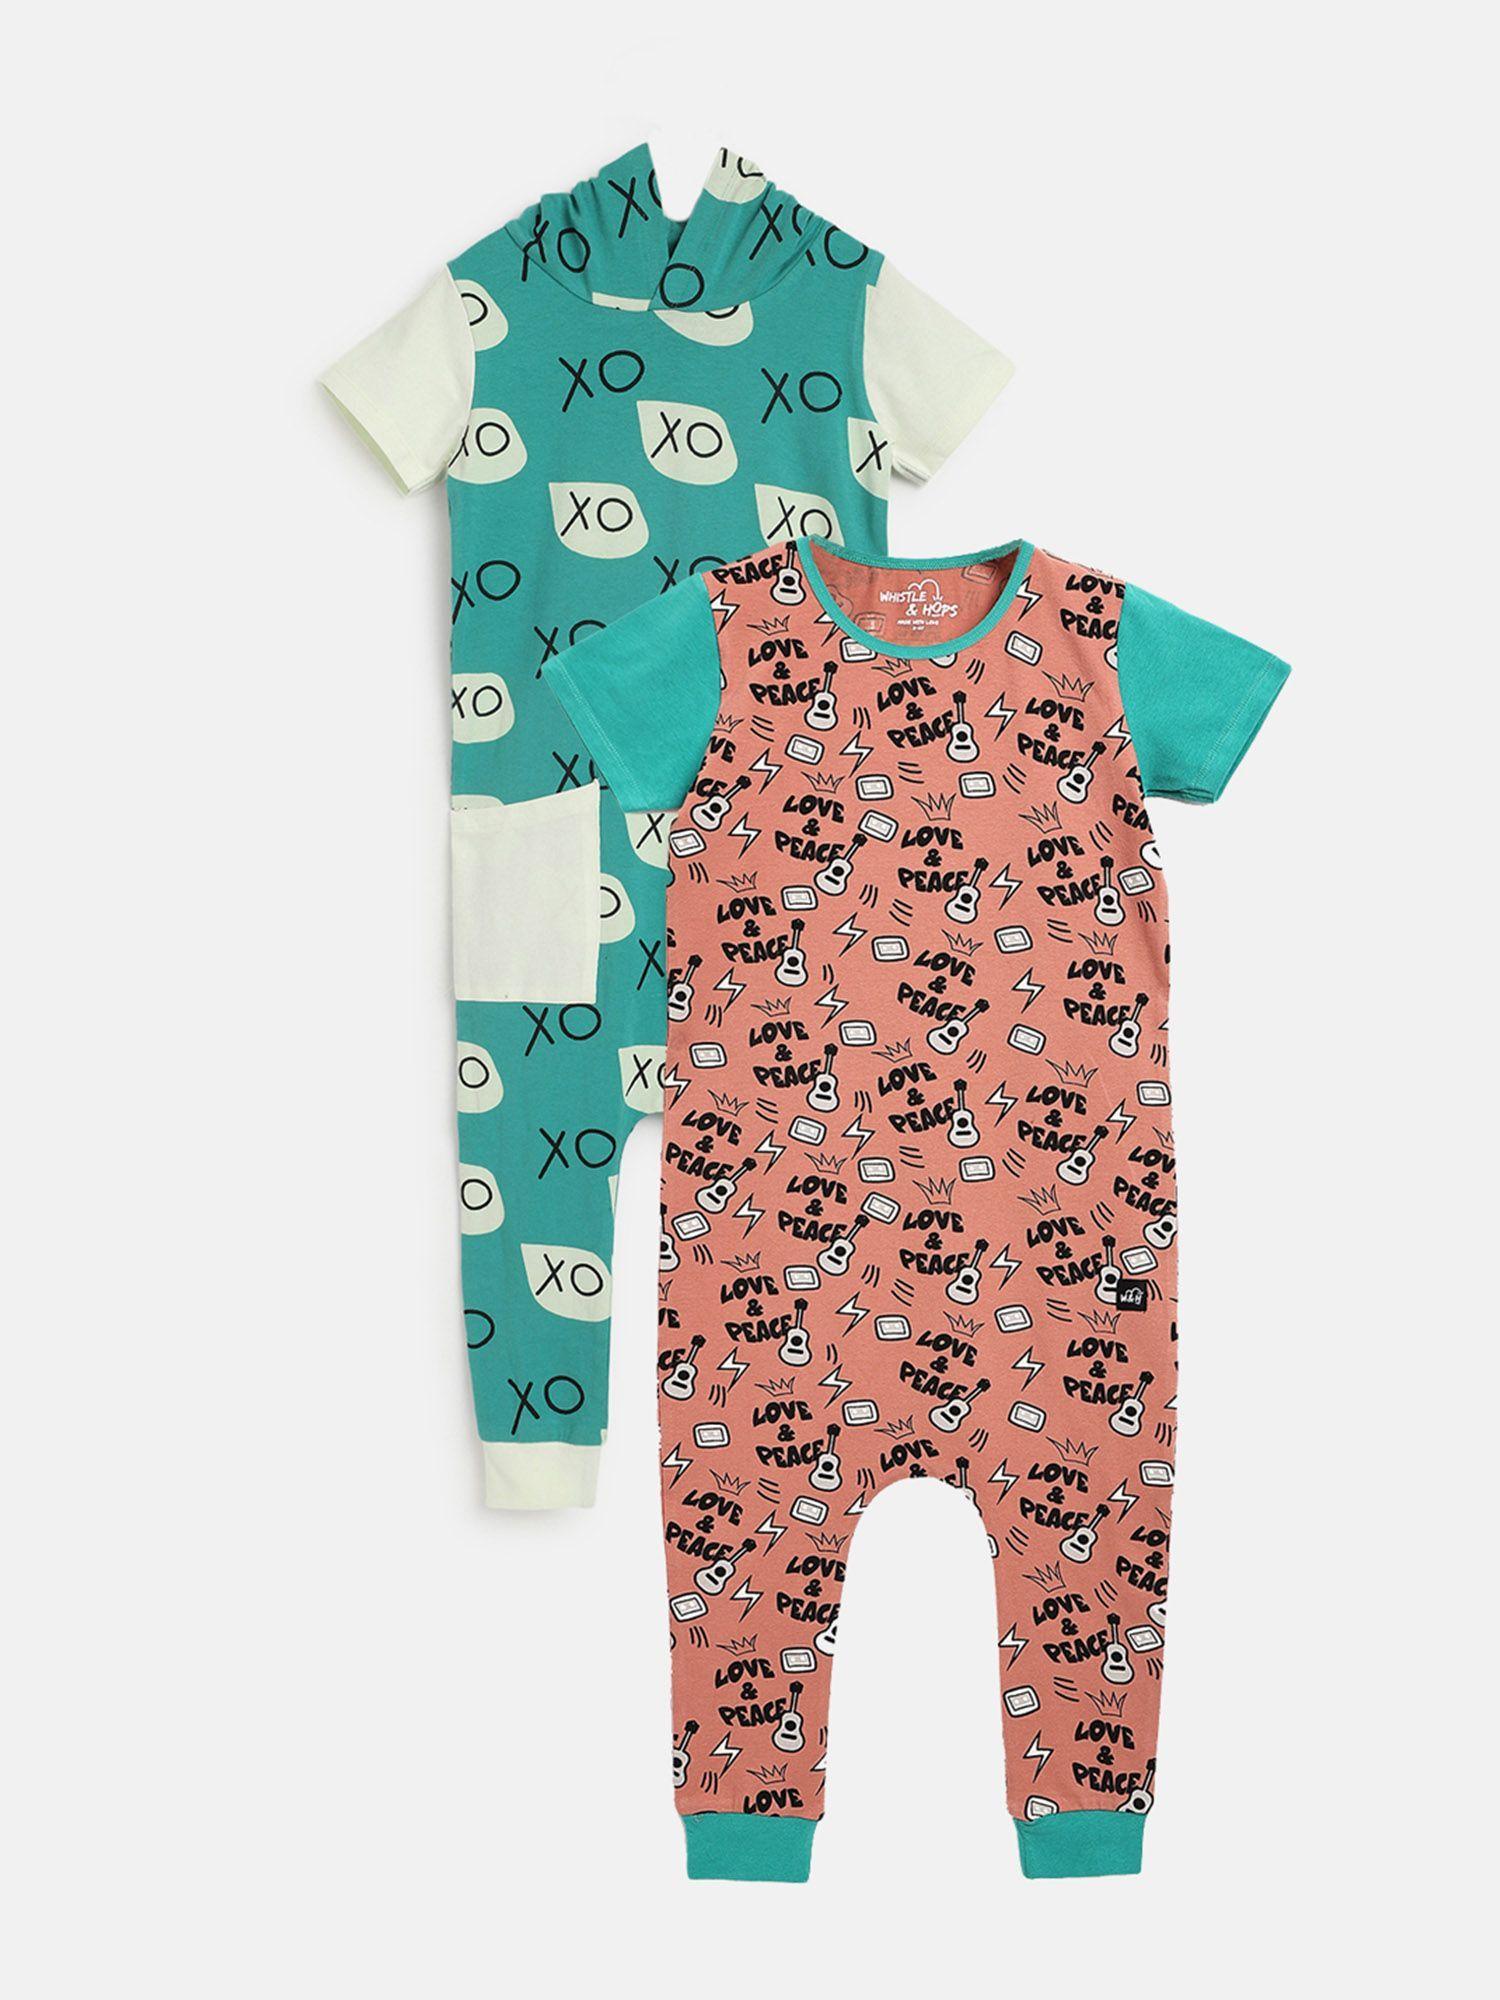 Printed Half Sleeves Rompers- Love & Peace and Blue Xo (Set of 2)